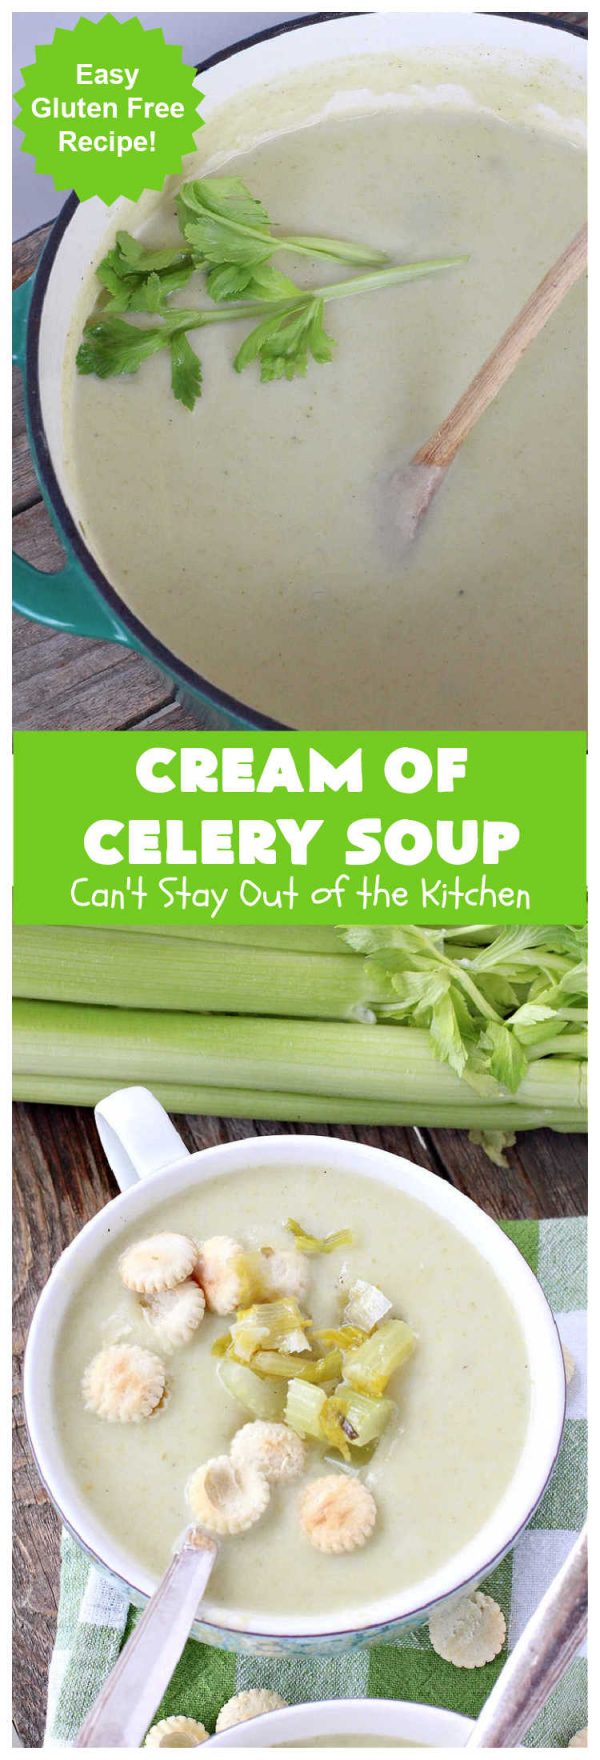 Cream of Celery Soup – Can't Stay Out of the Kitchen